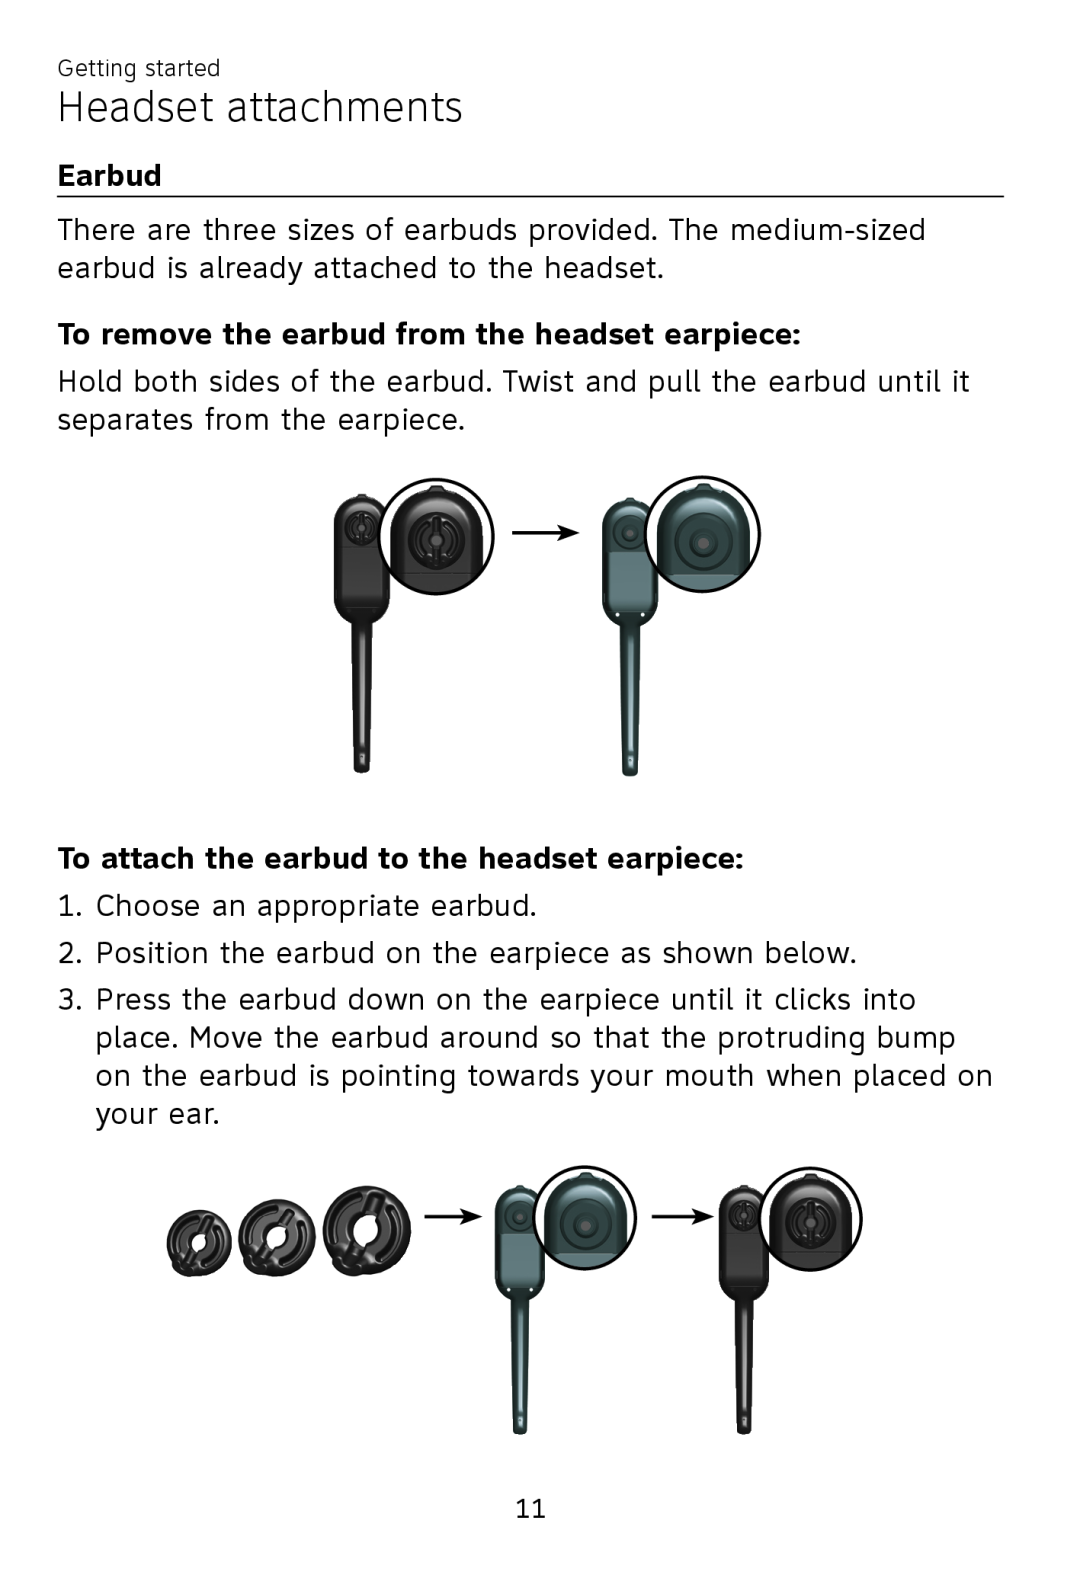 AT&T TL7700 user manual Headset attachments, Earbud, To remove the earbud from the headset earpiece 